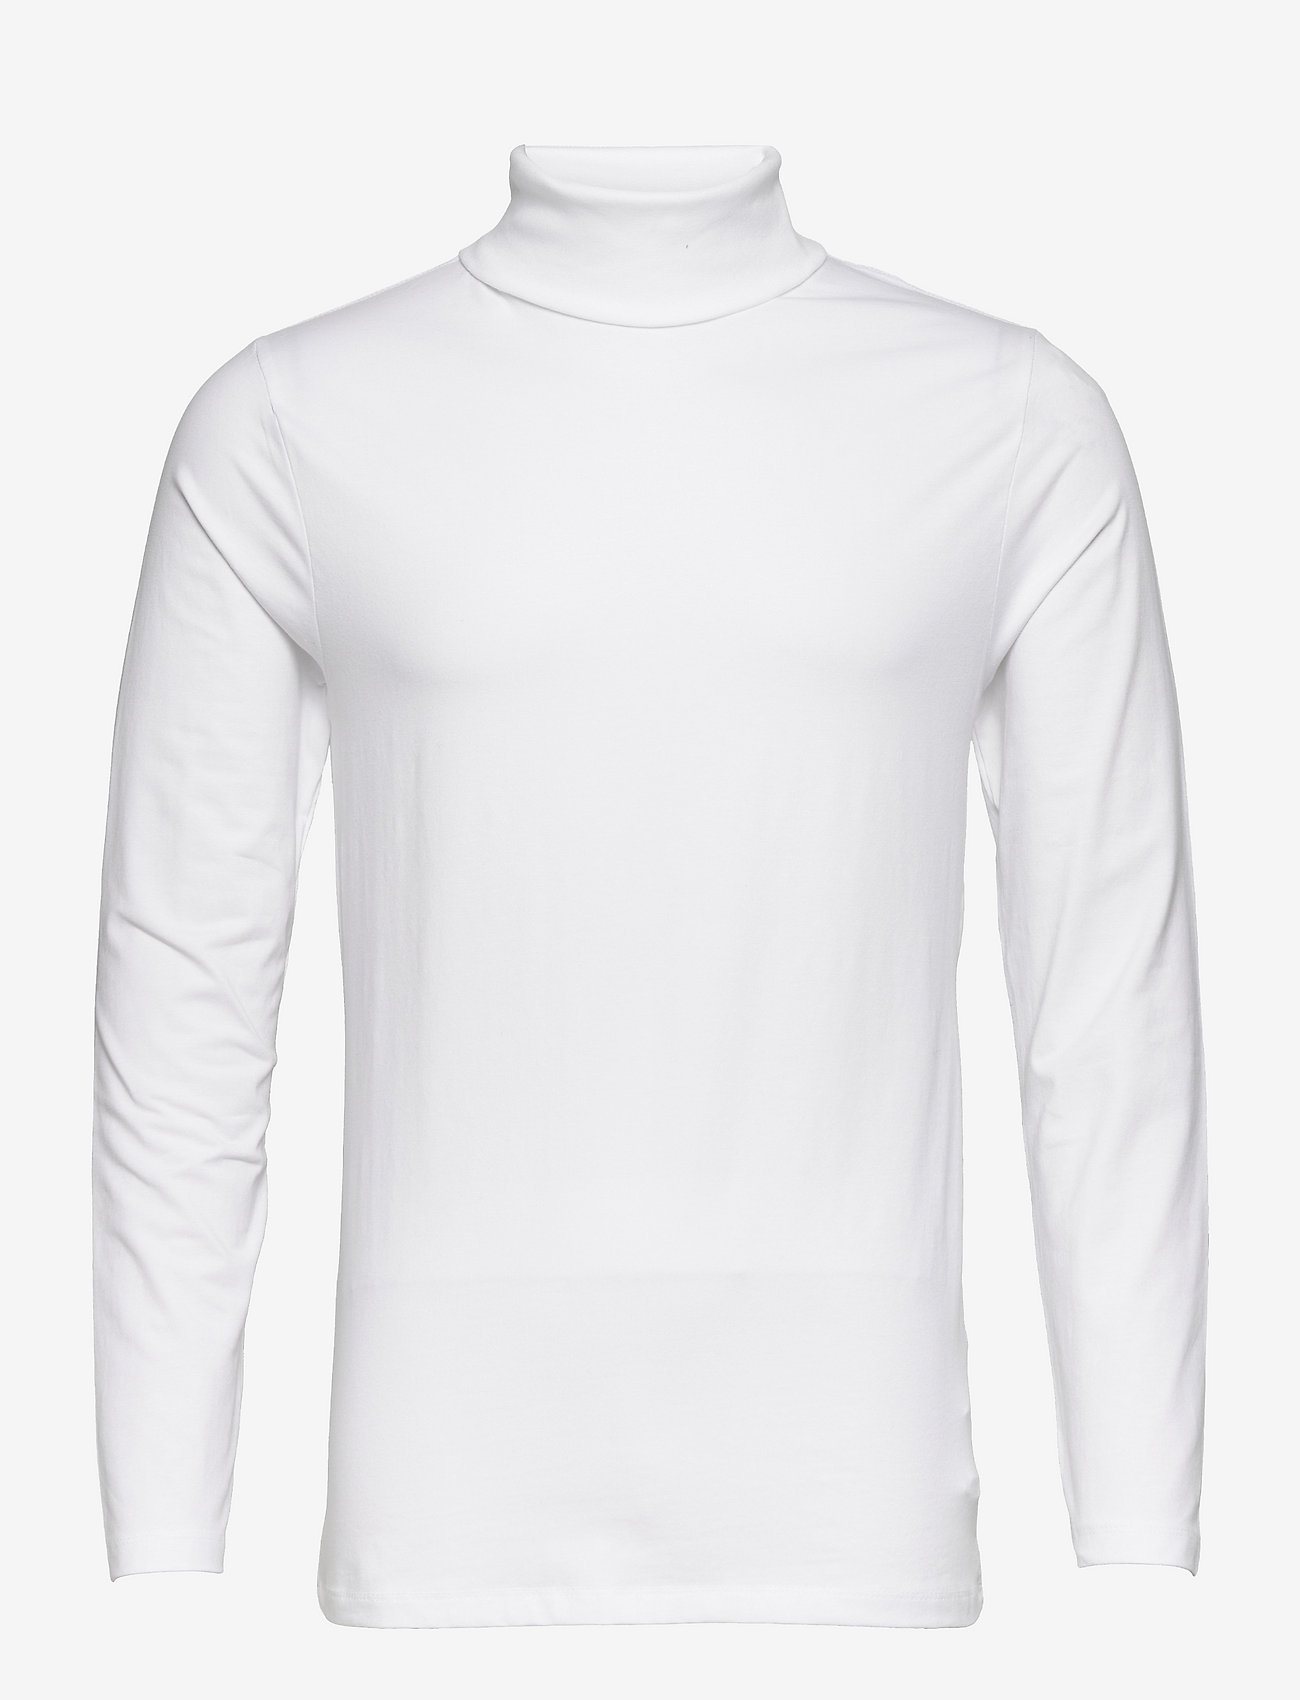 Lindbergh - Roll neck tee L/S - nordic style - white - 1